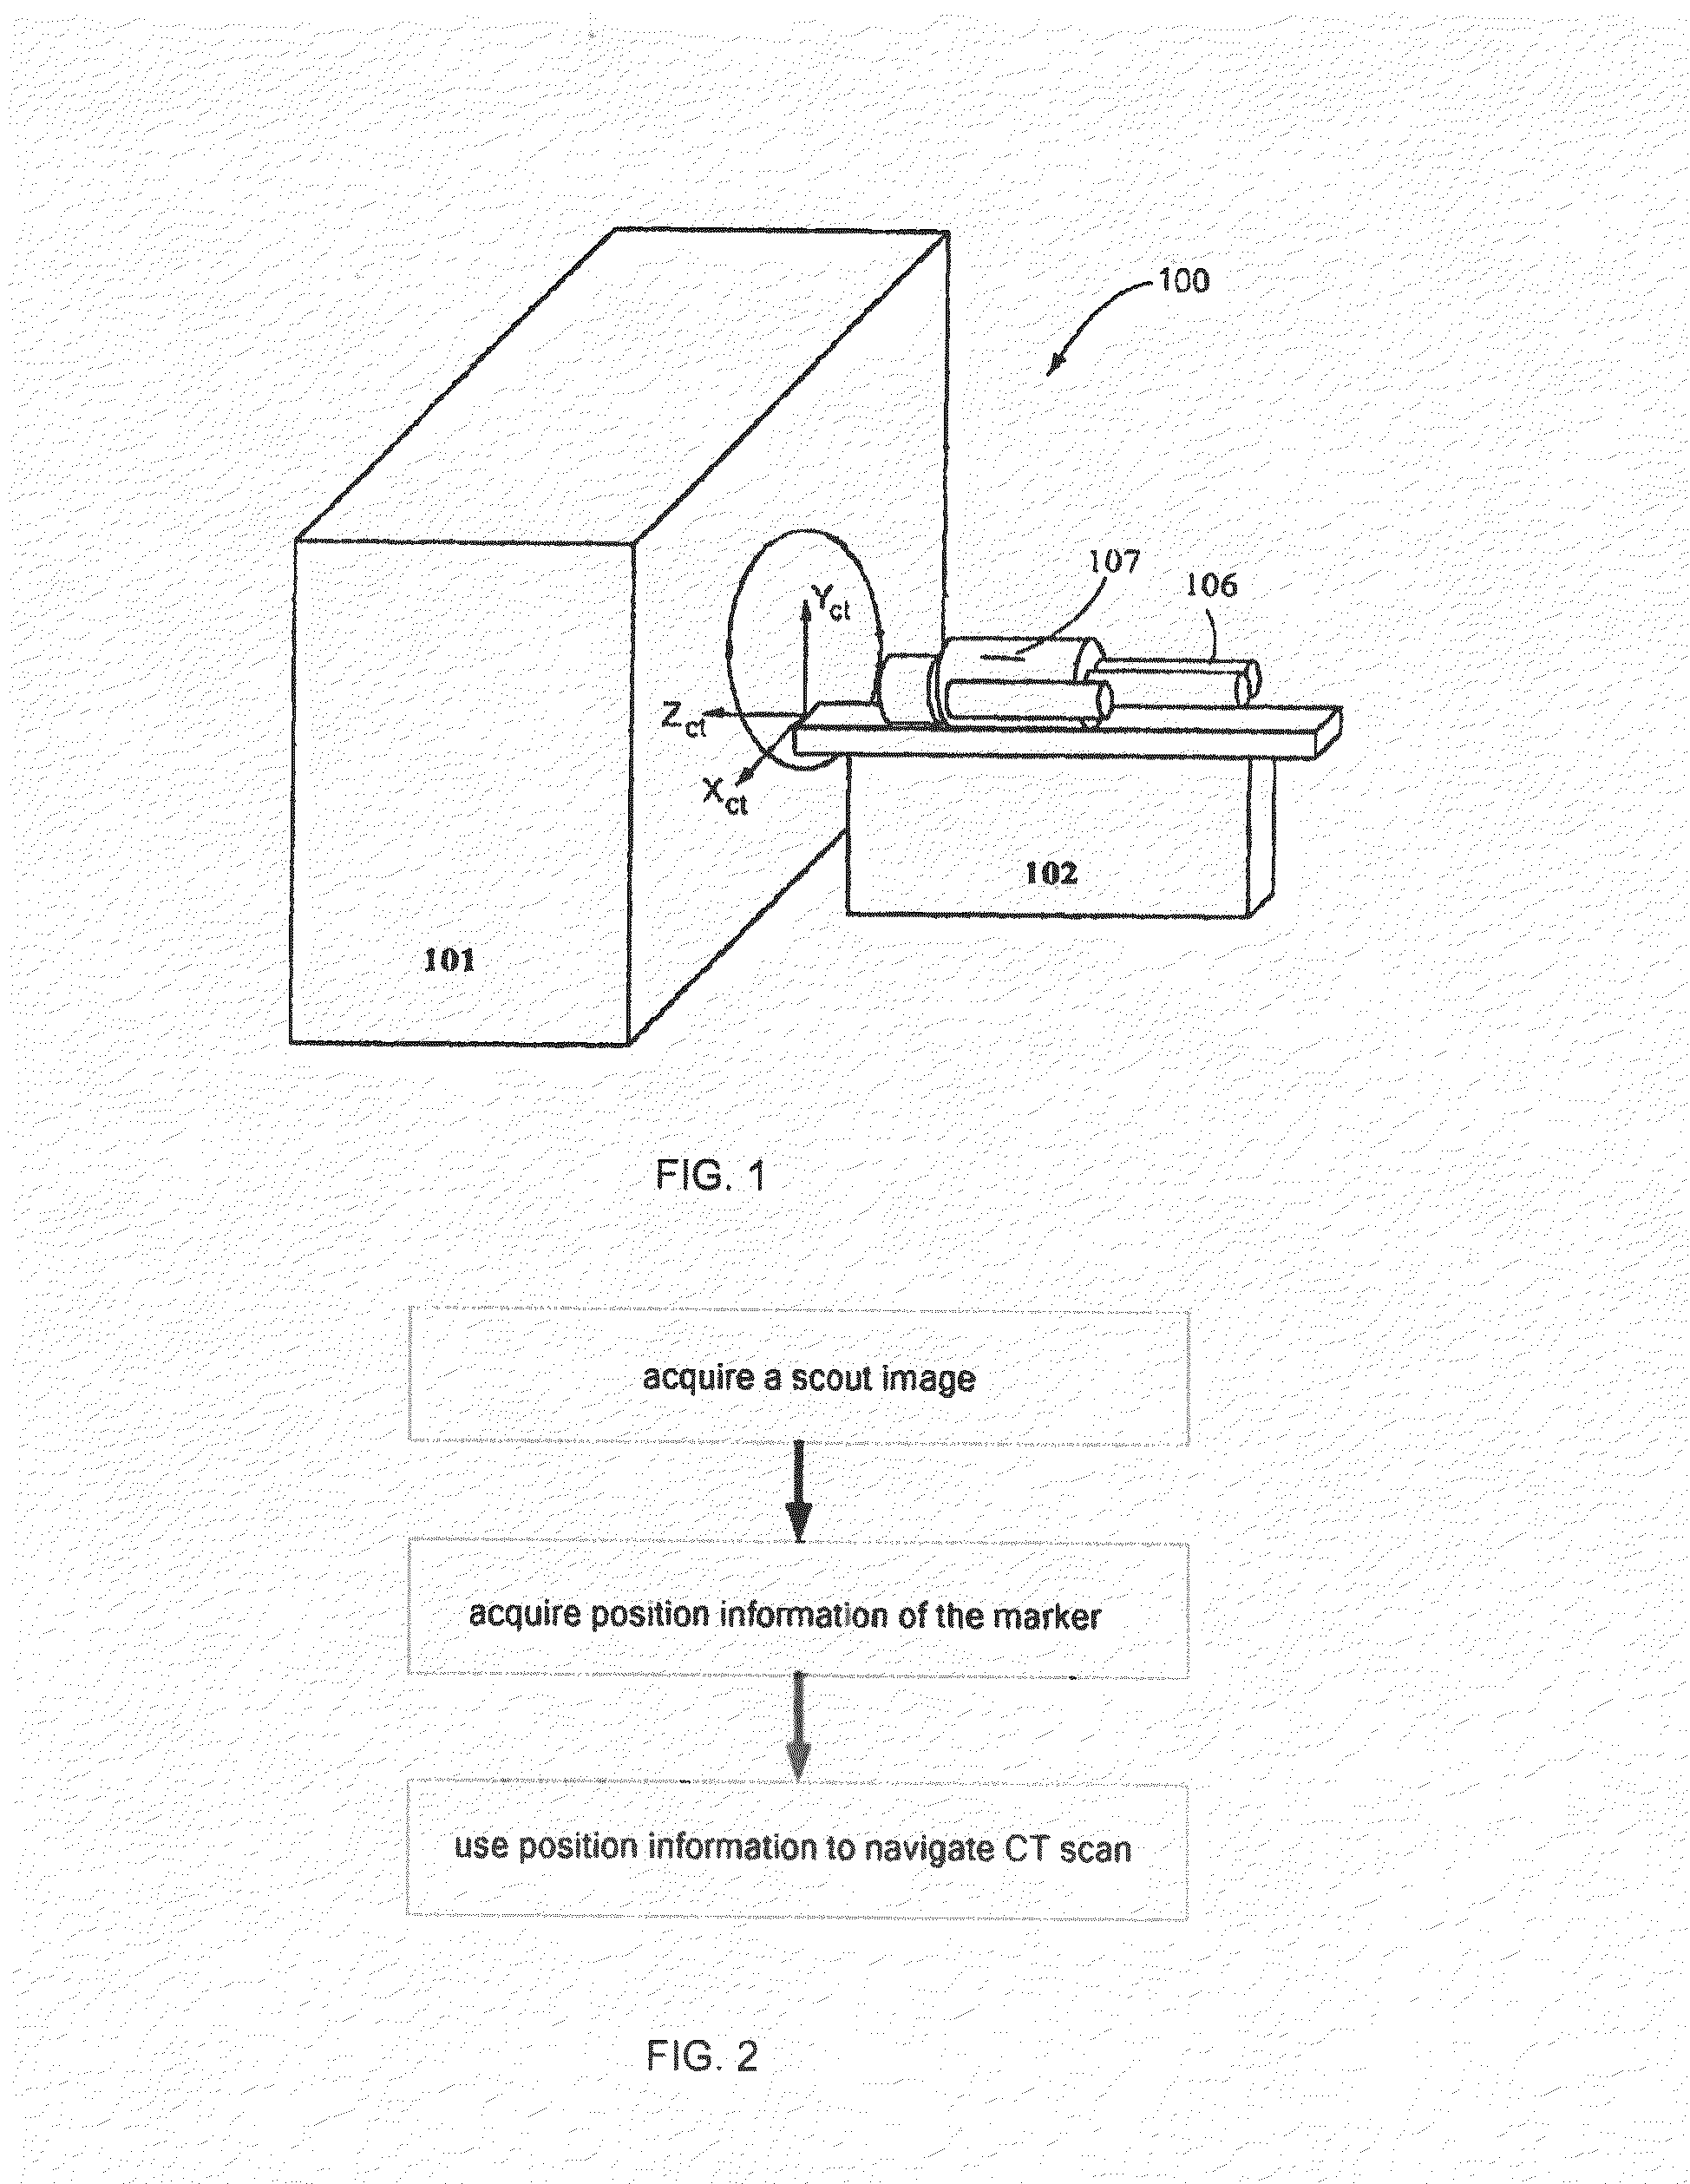 Method and apparatus for navigating CT scan with a marker